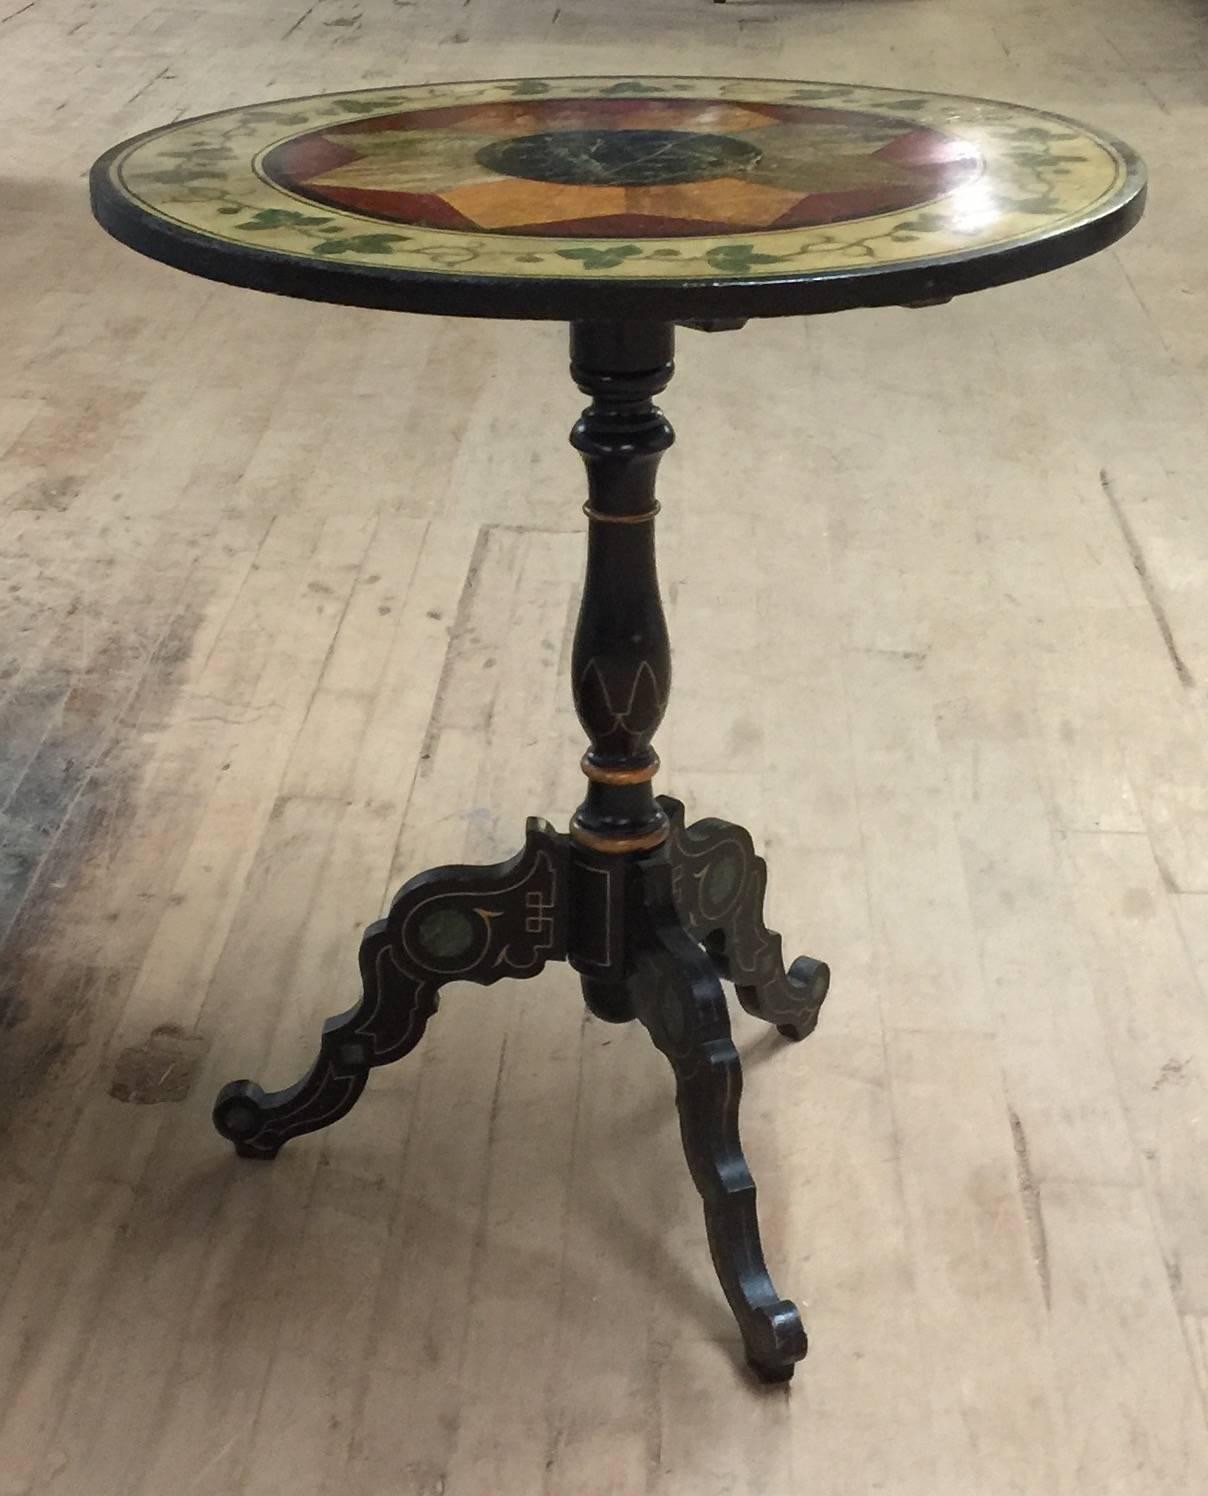 The tilt-top painted with faux marble design in the center surrounded by a vine and leaf pattern.